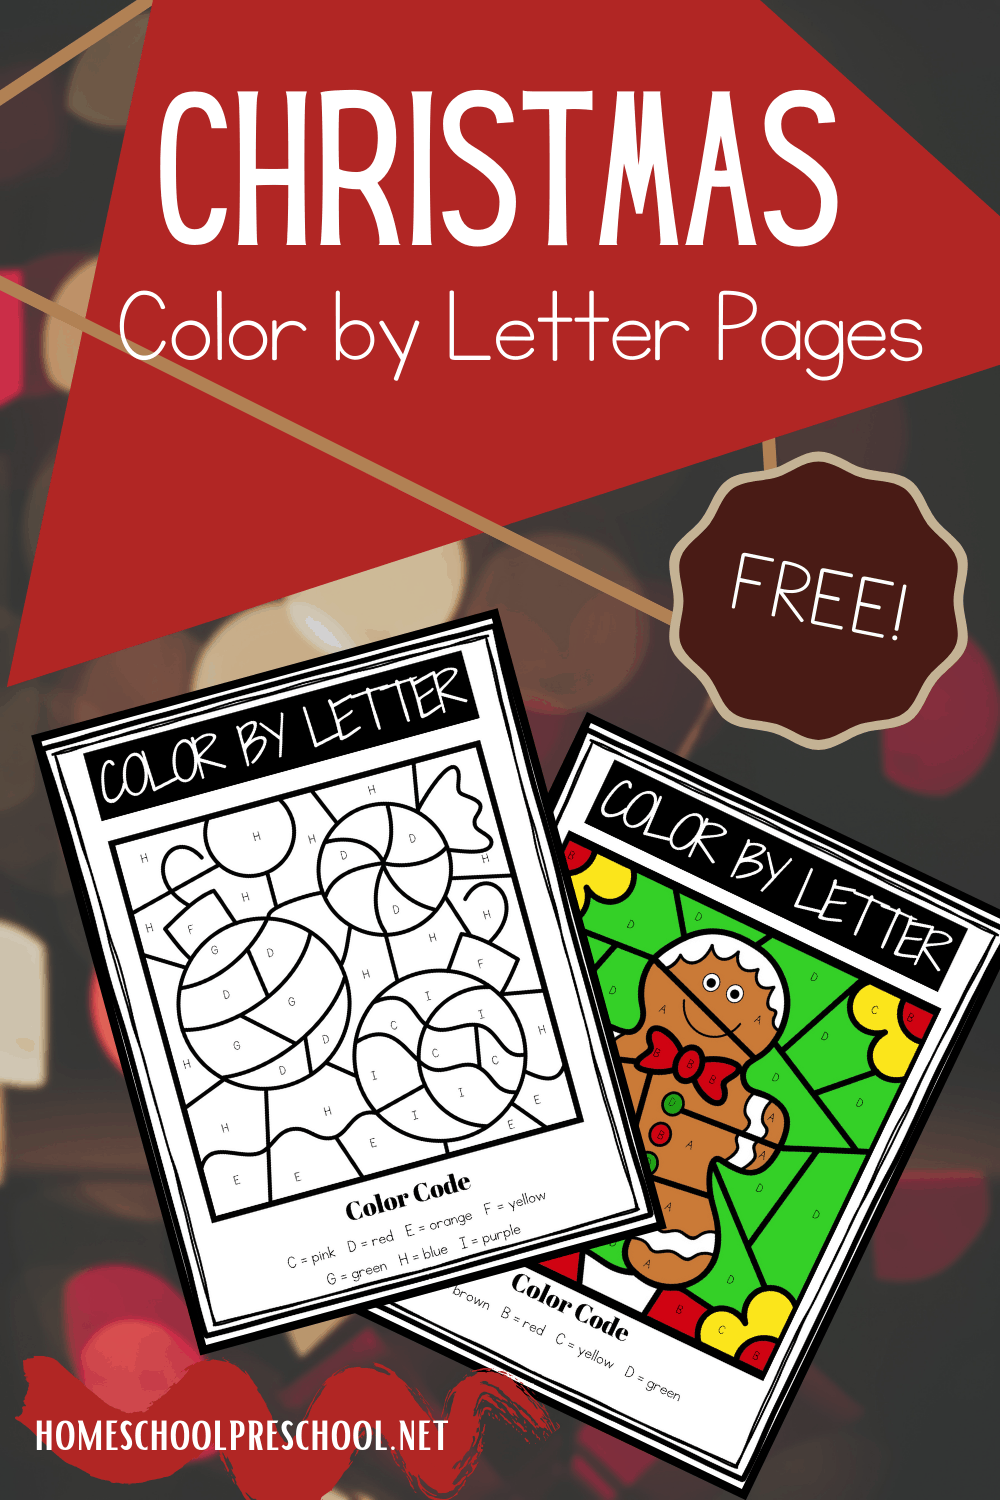 Christmas color by letter worksheets story